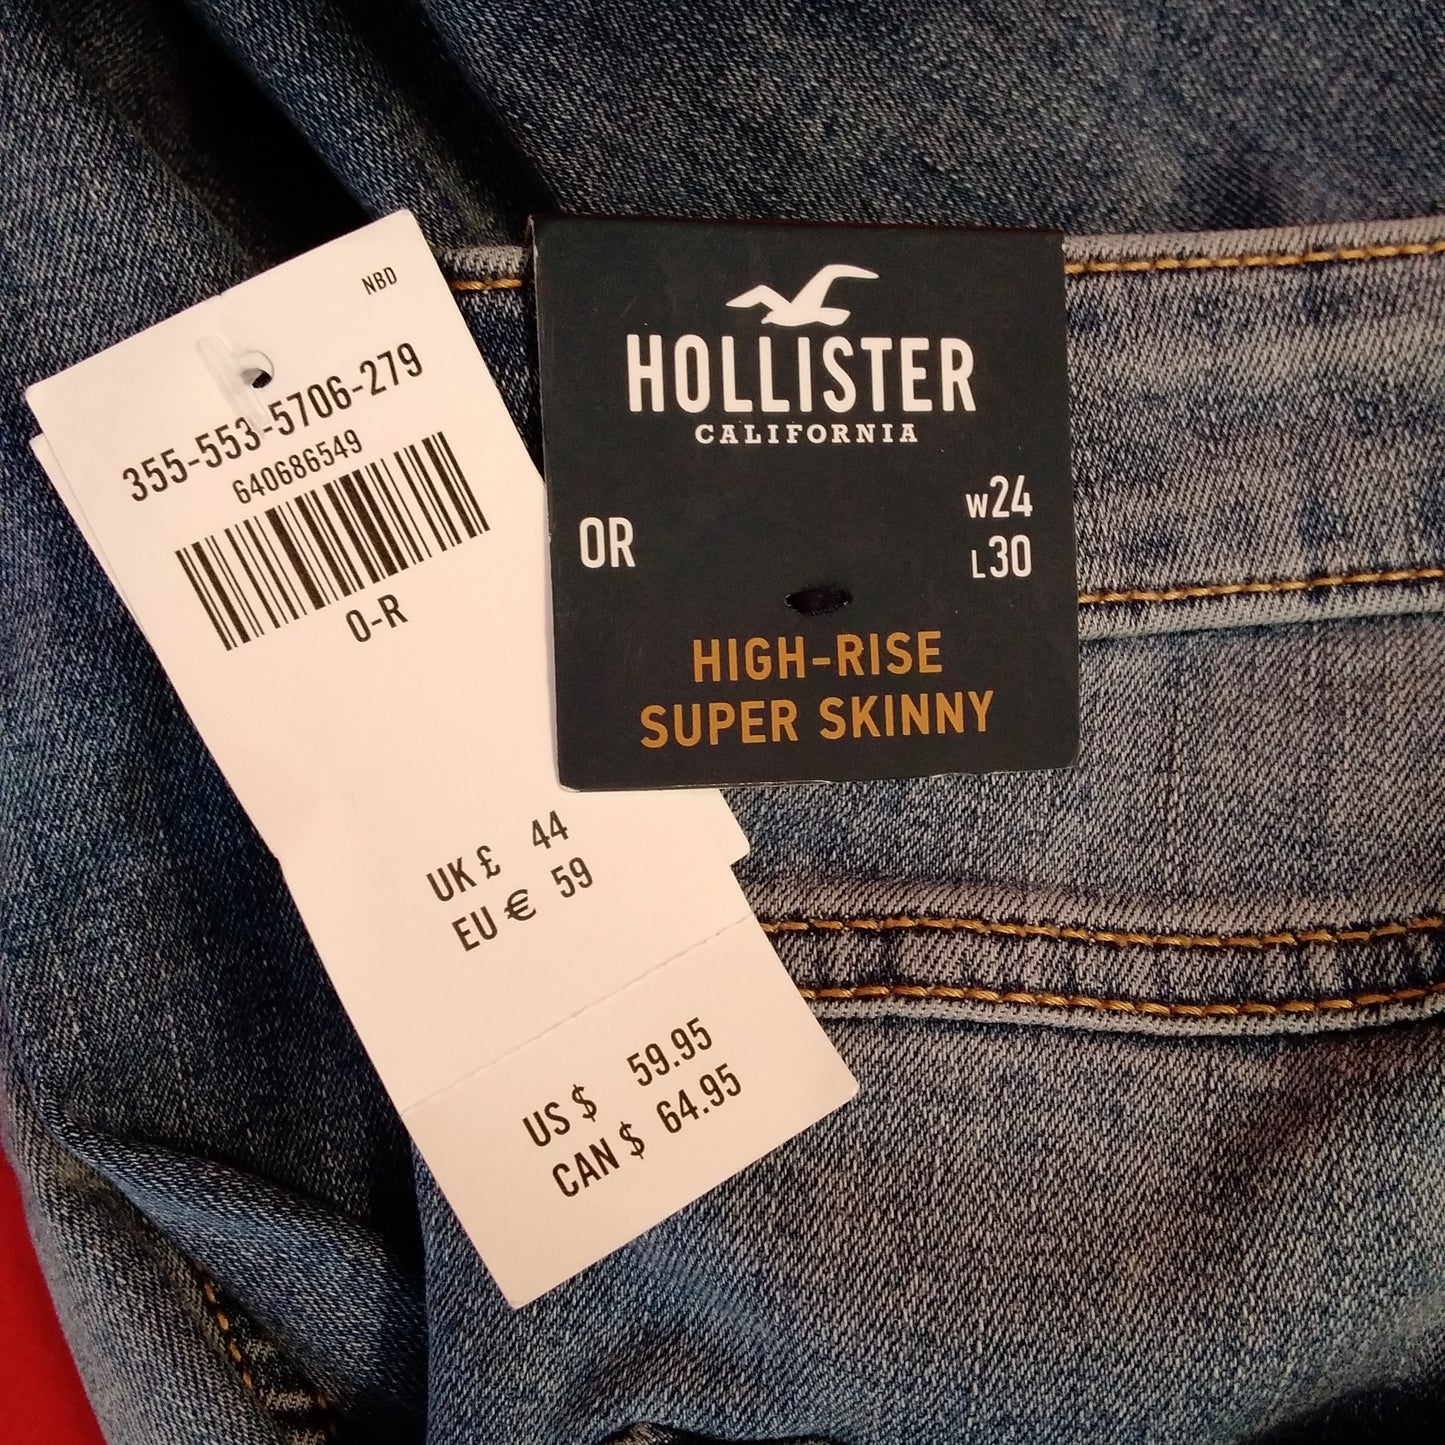 NWT - Hollister Super Skinny High-Rise Ripped Blue Jeans - W24 L30